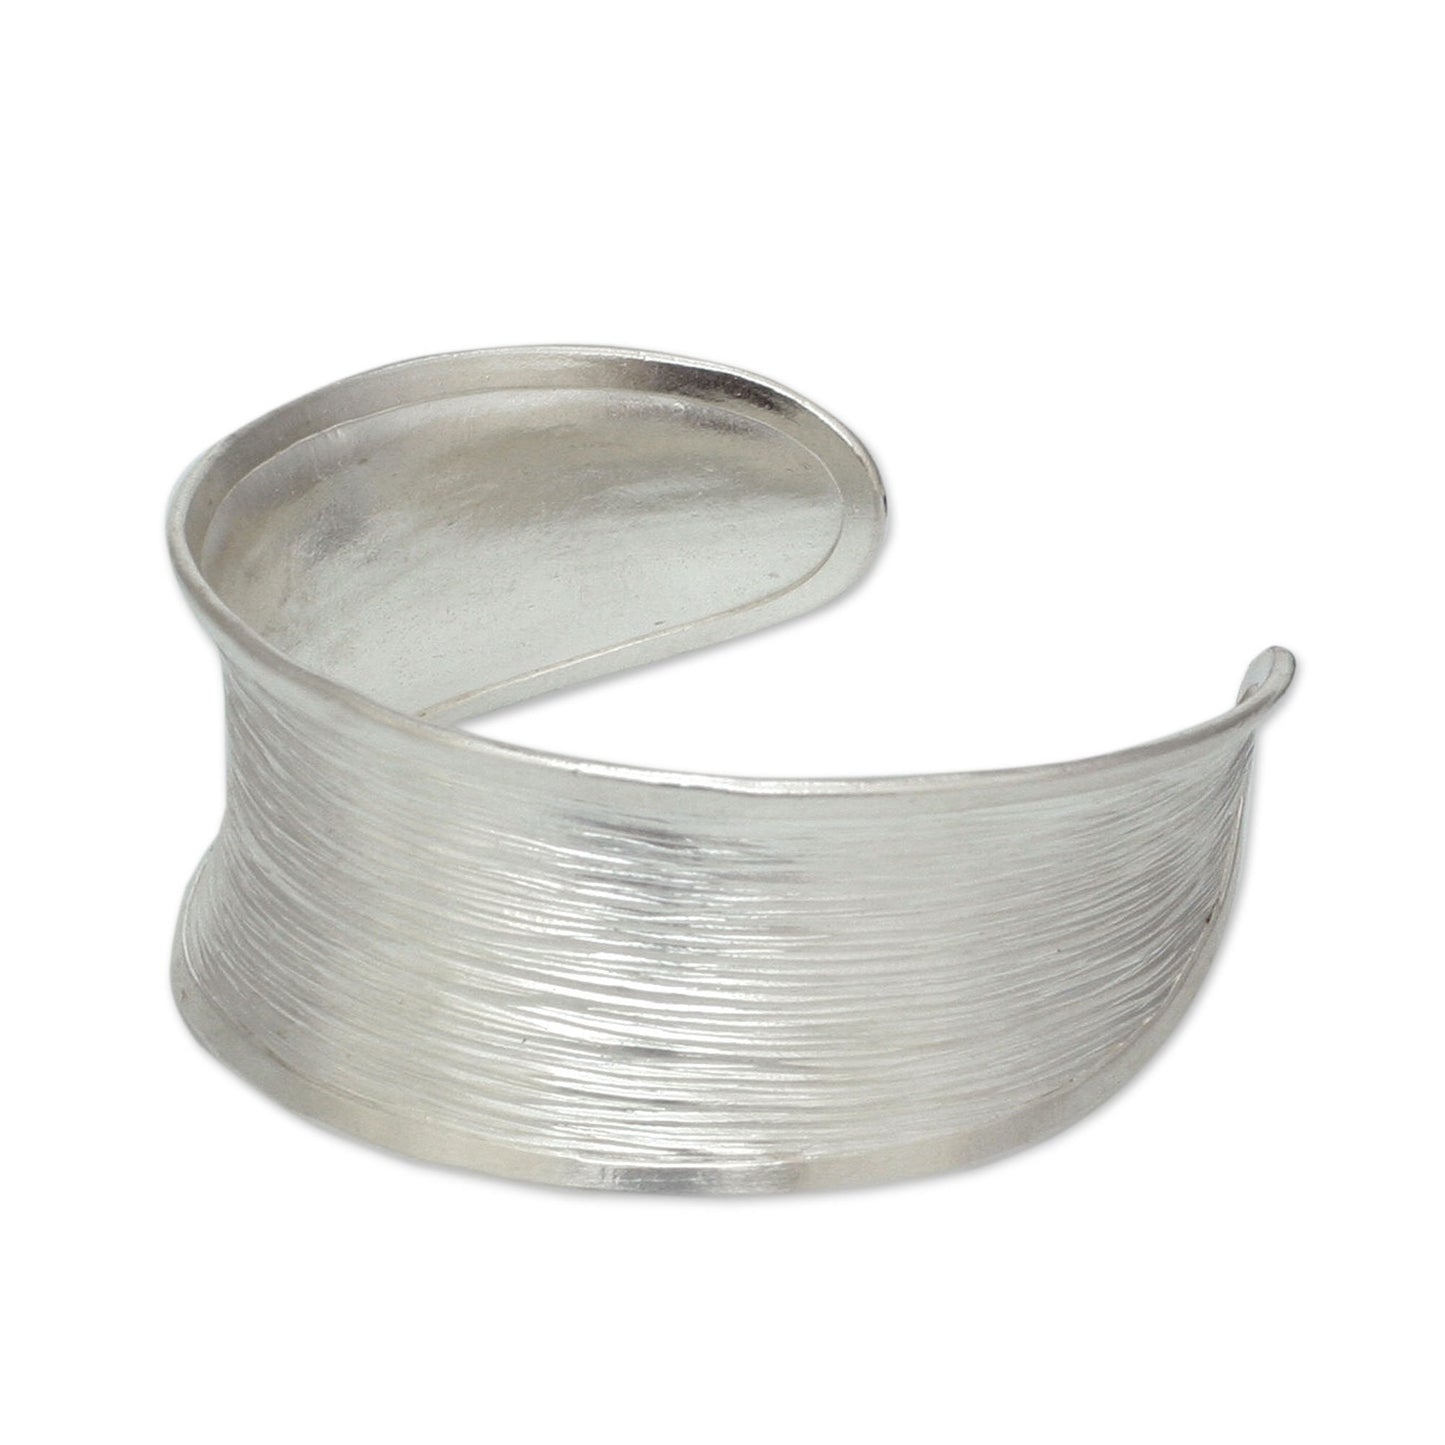 Luminous Handcrafted Sterling Silver Cuff Bracelet